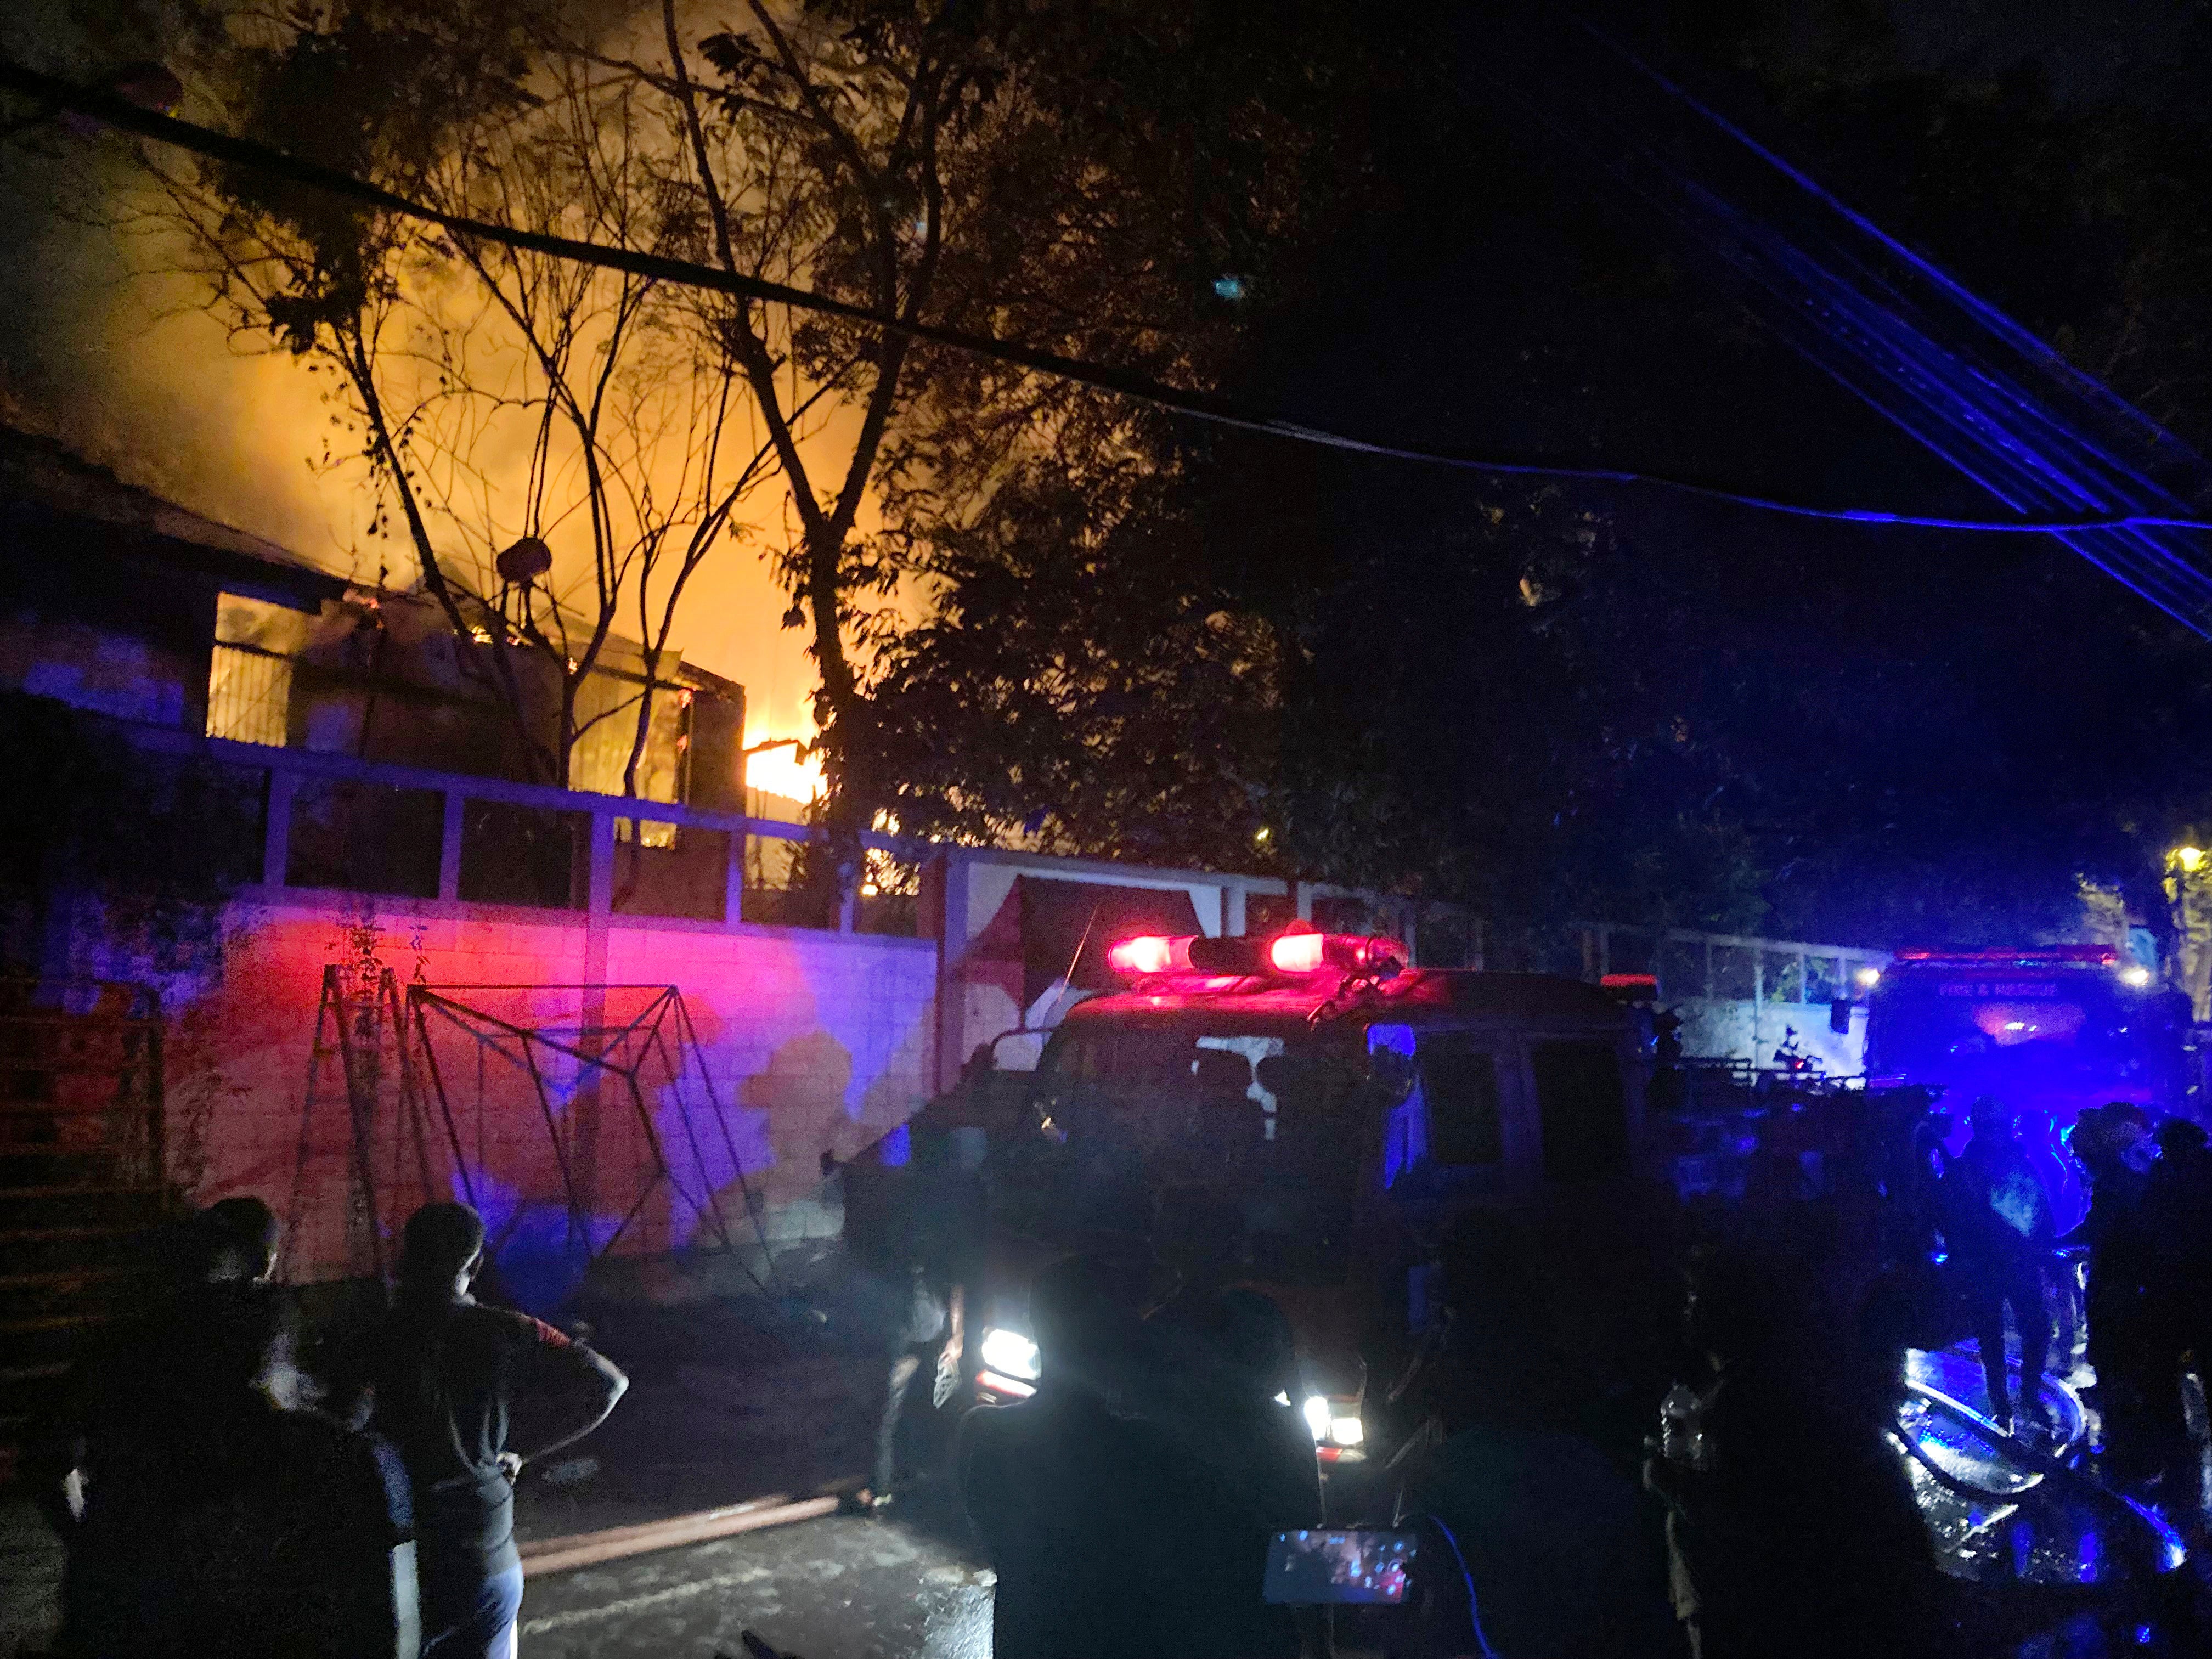 Firefighters try to douse a fire at the Sri Lankan prime minister Ranil Wickremesinghe’s private residence